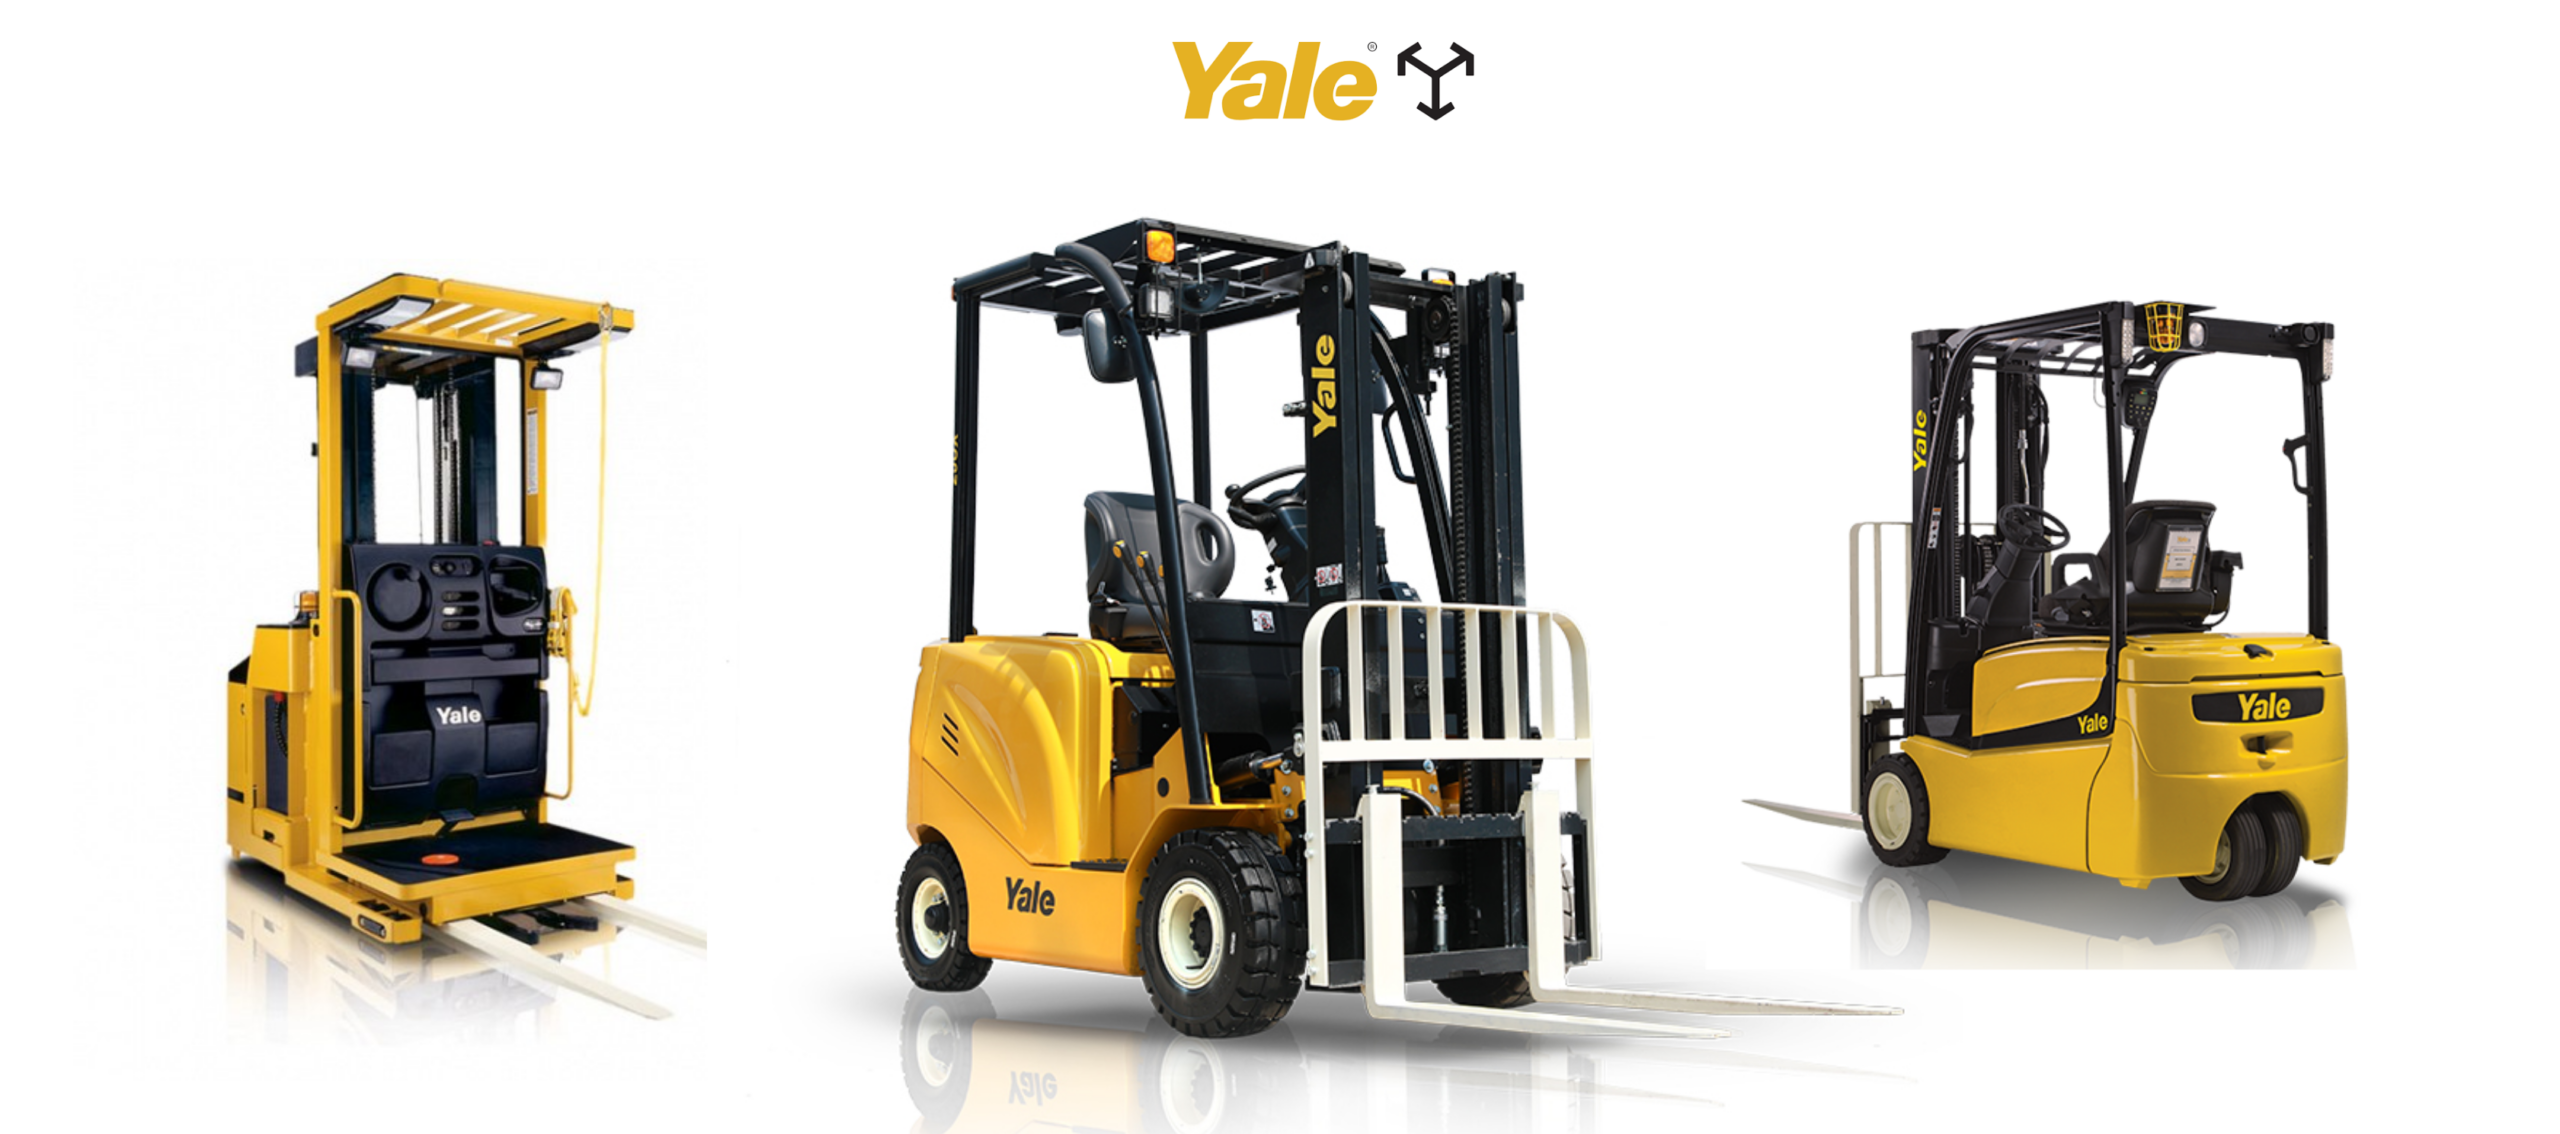 Two Australian Yale forklifts and one Yale order picker.